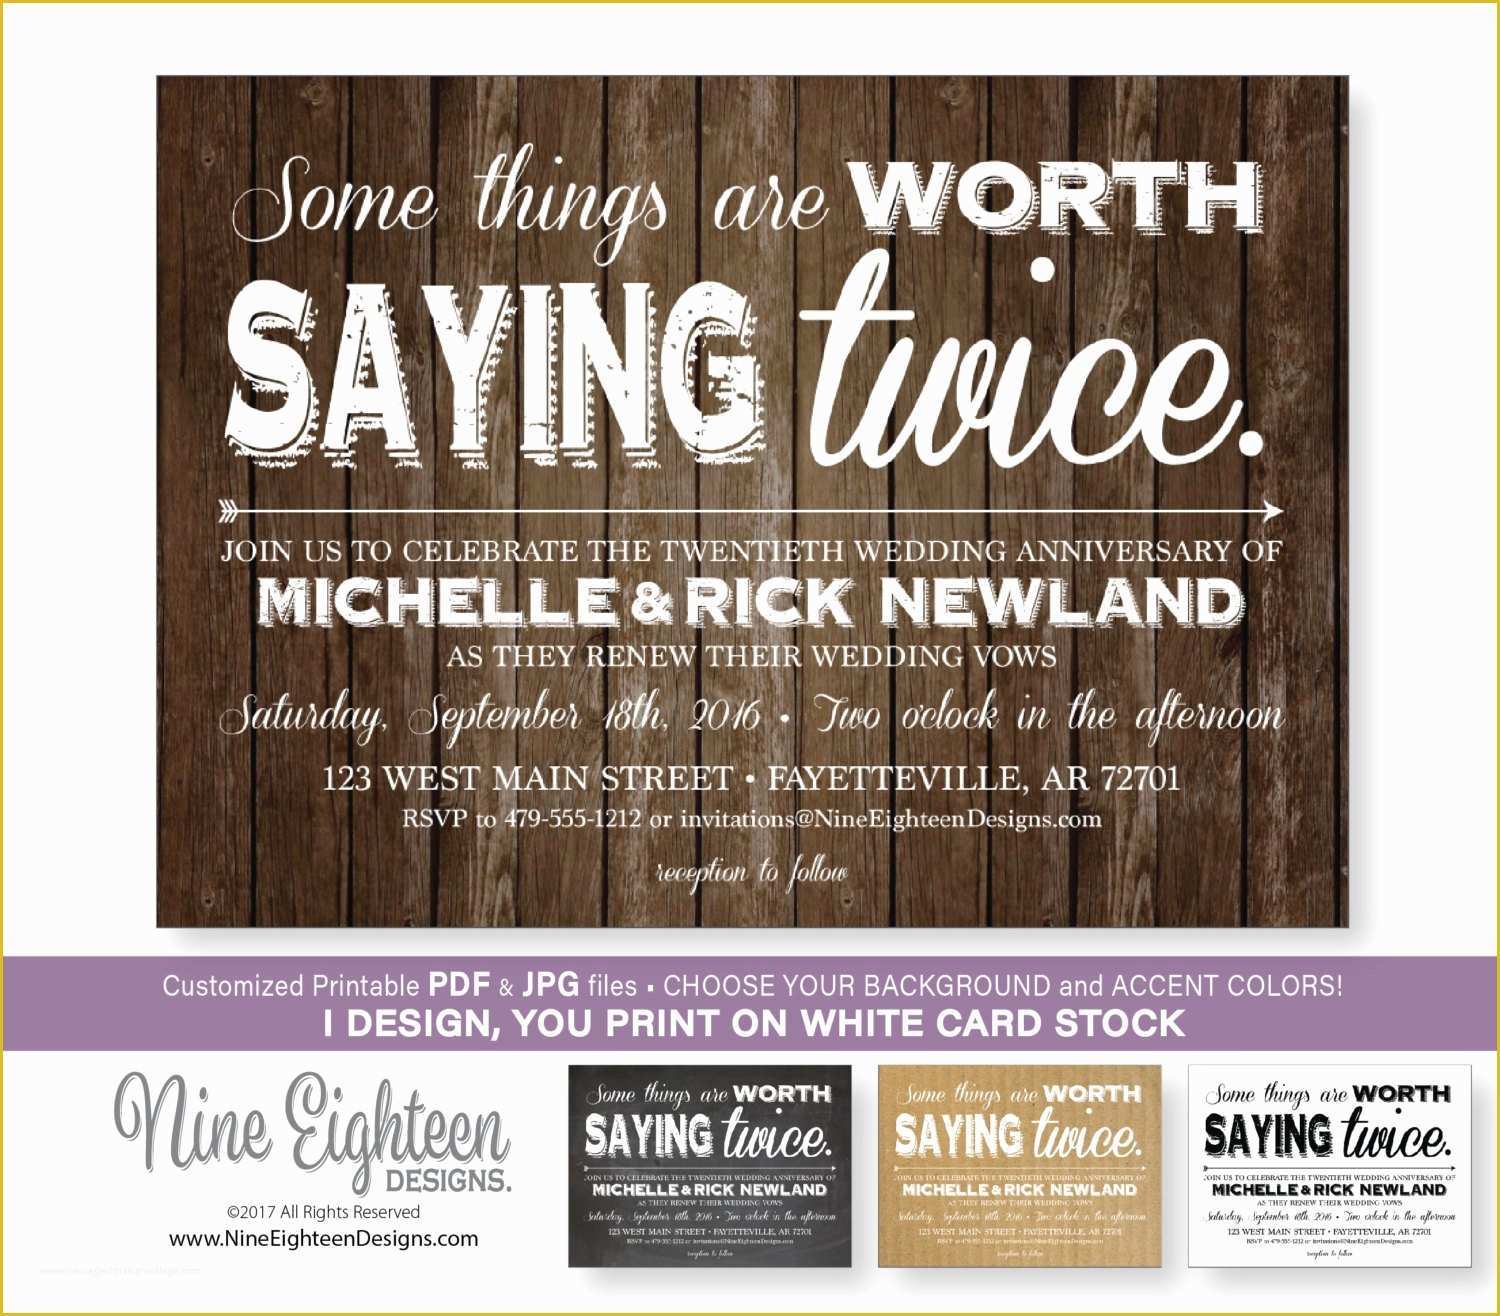 Vow Renewal Invitation Templates Free Of Vow Renewal Invitation some Things are Worth Saying Twice